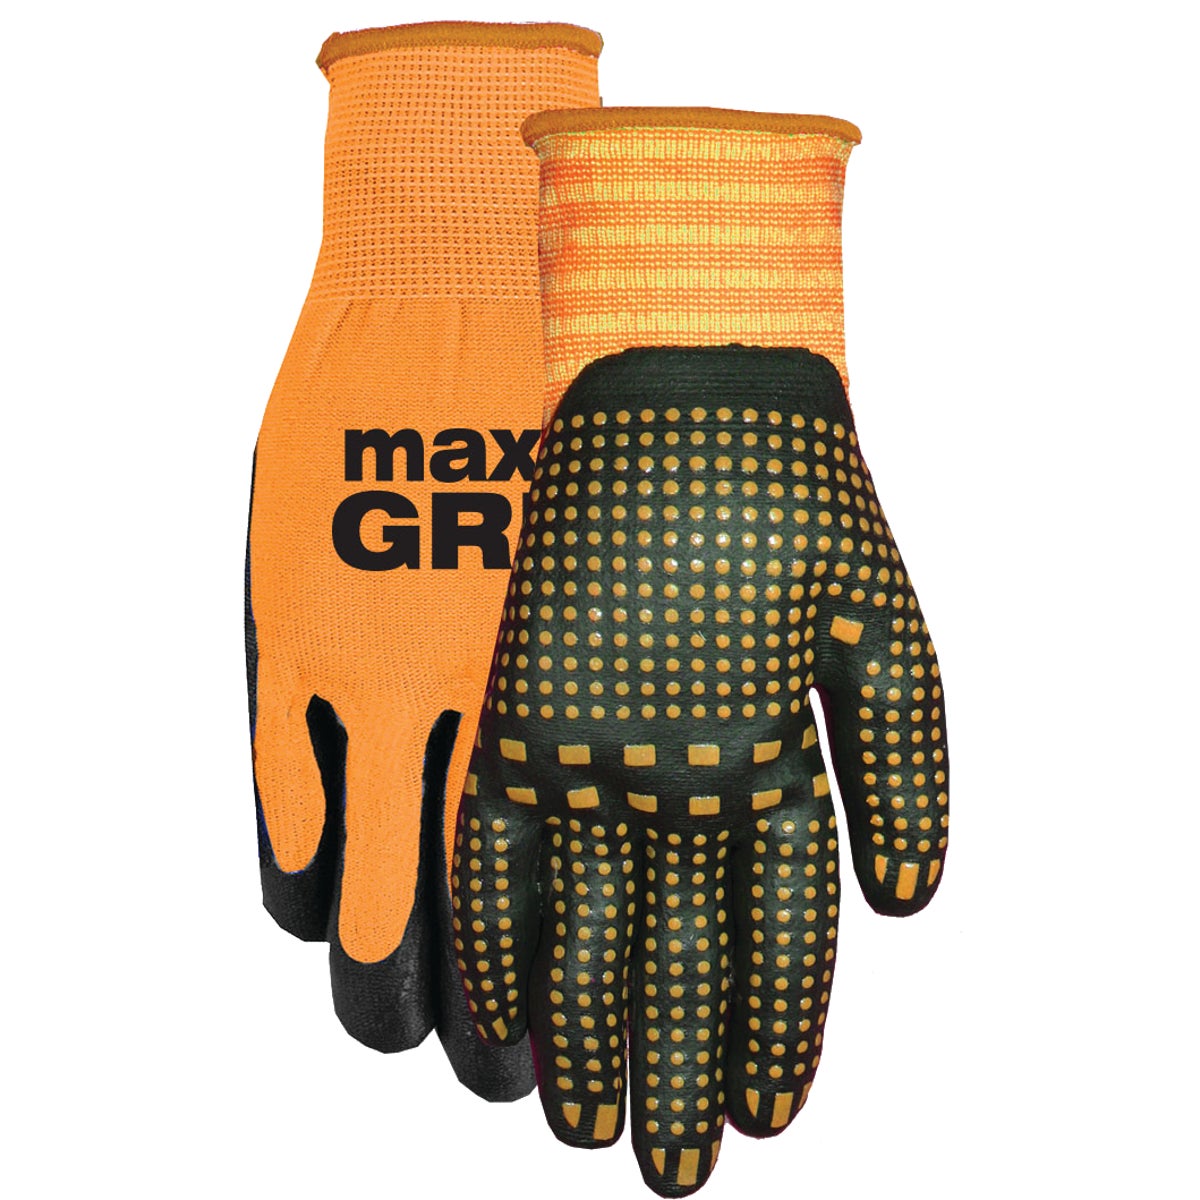 Midwest Quality Glove Max Grip Men's Large Nitrile Coated Glove